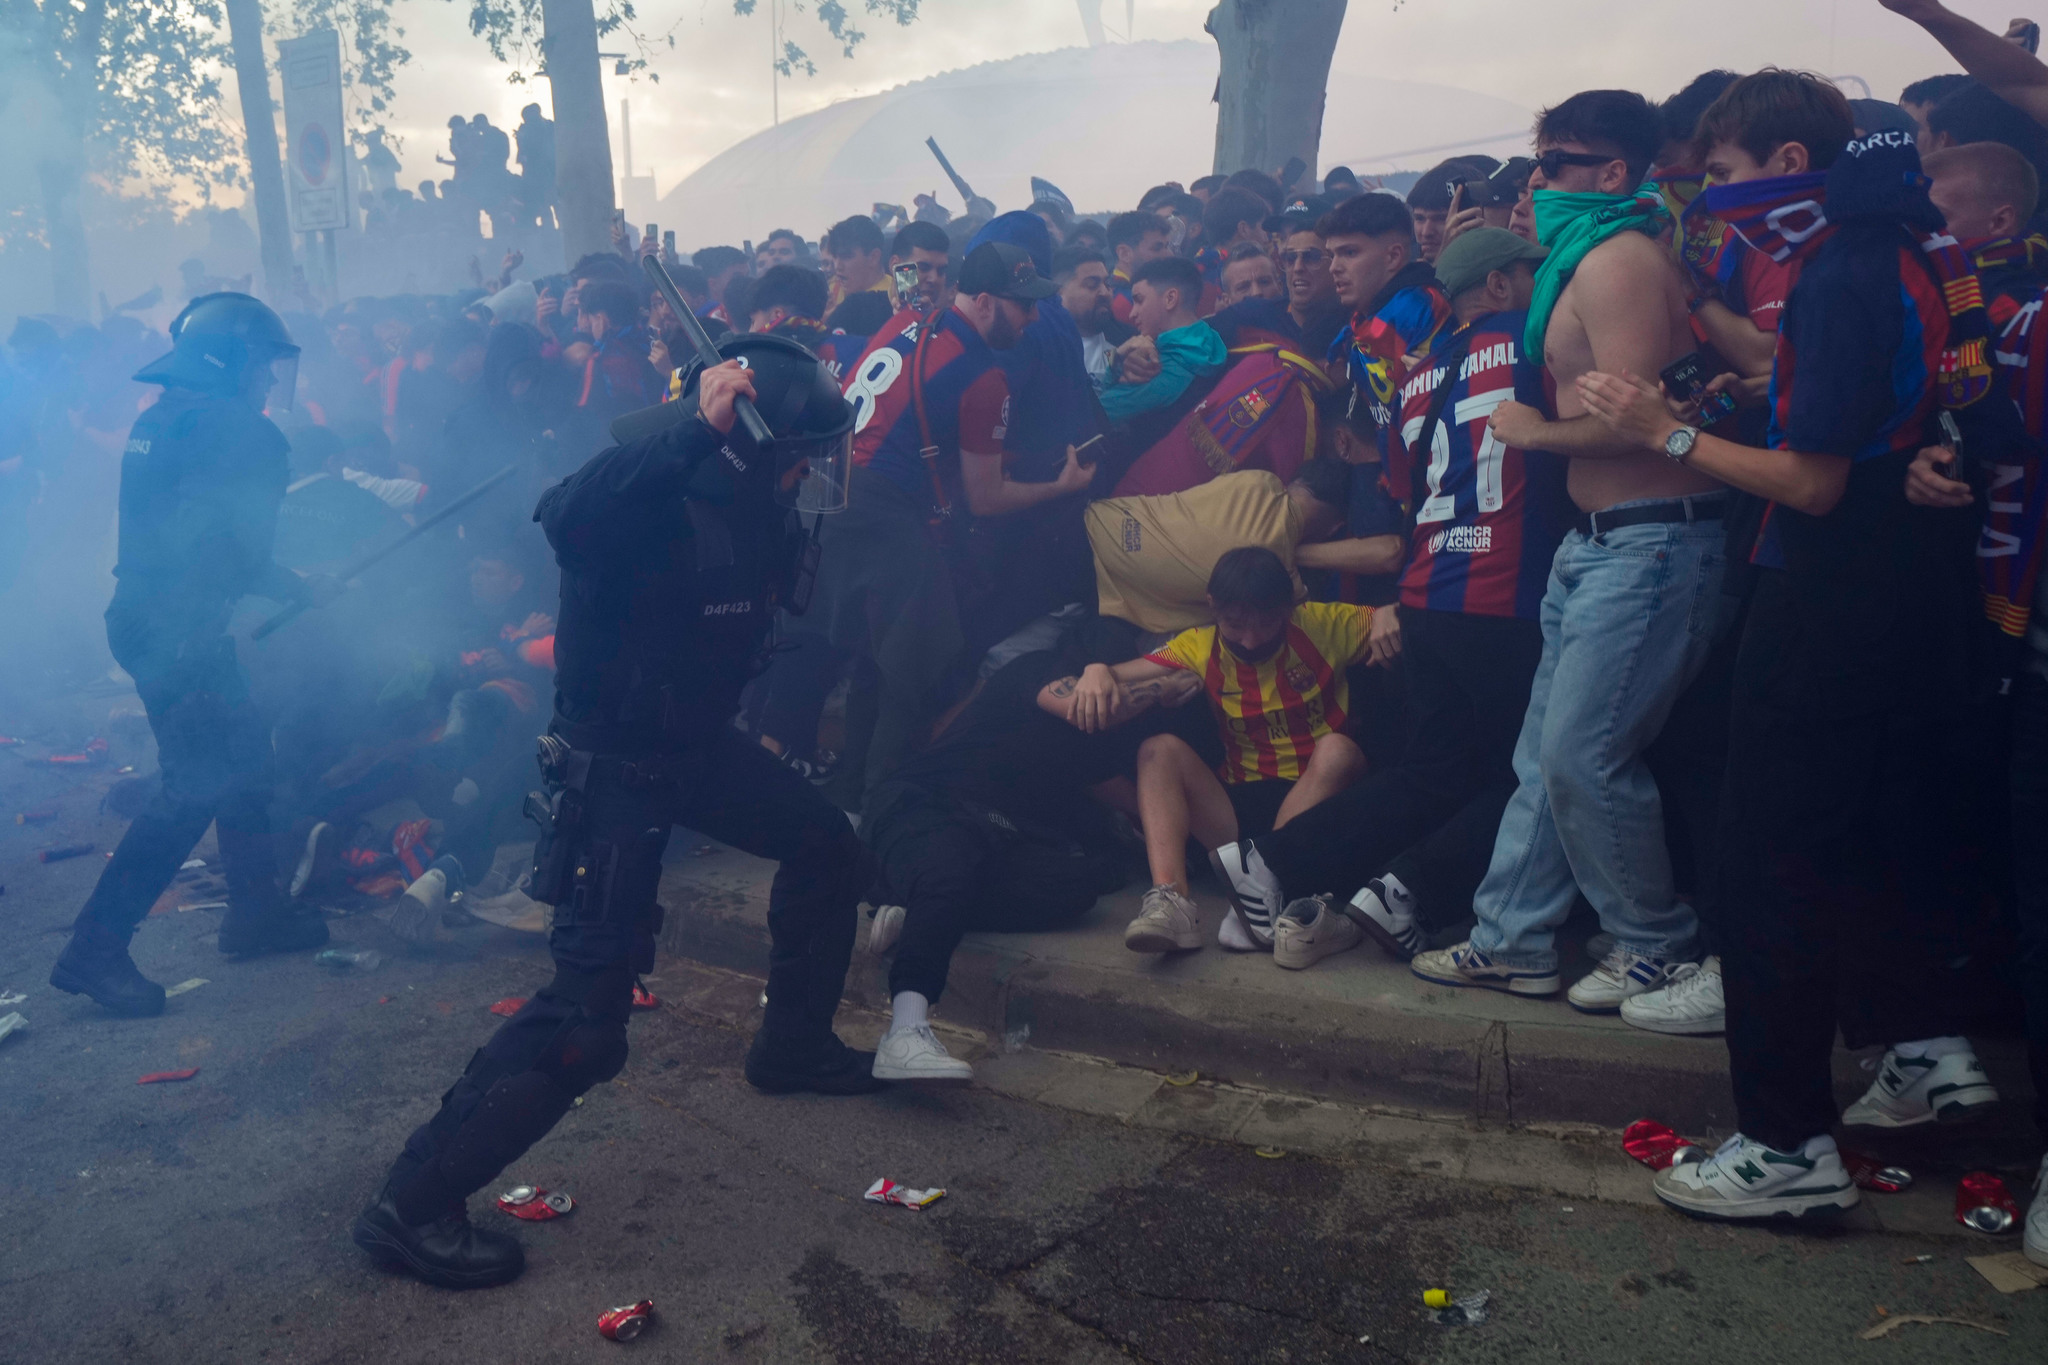 Some unfortuante scenes involving police and fans ahead of tonight's match